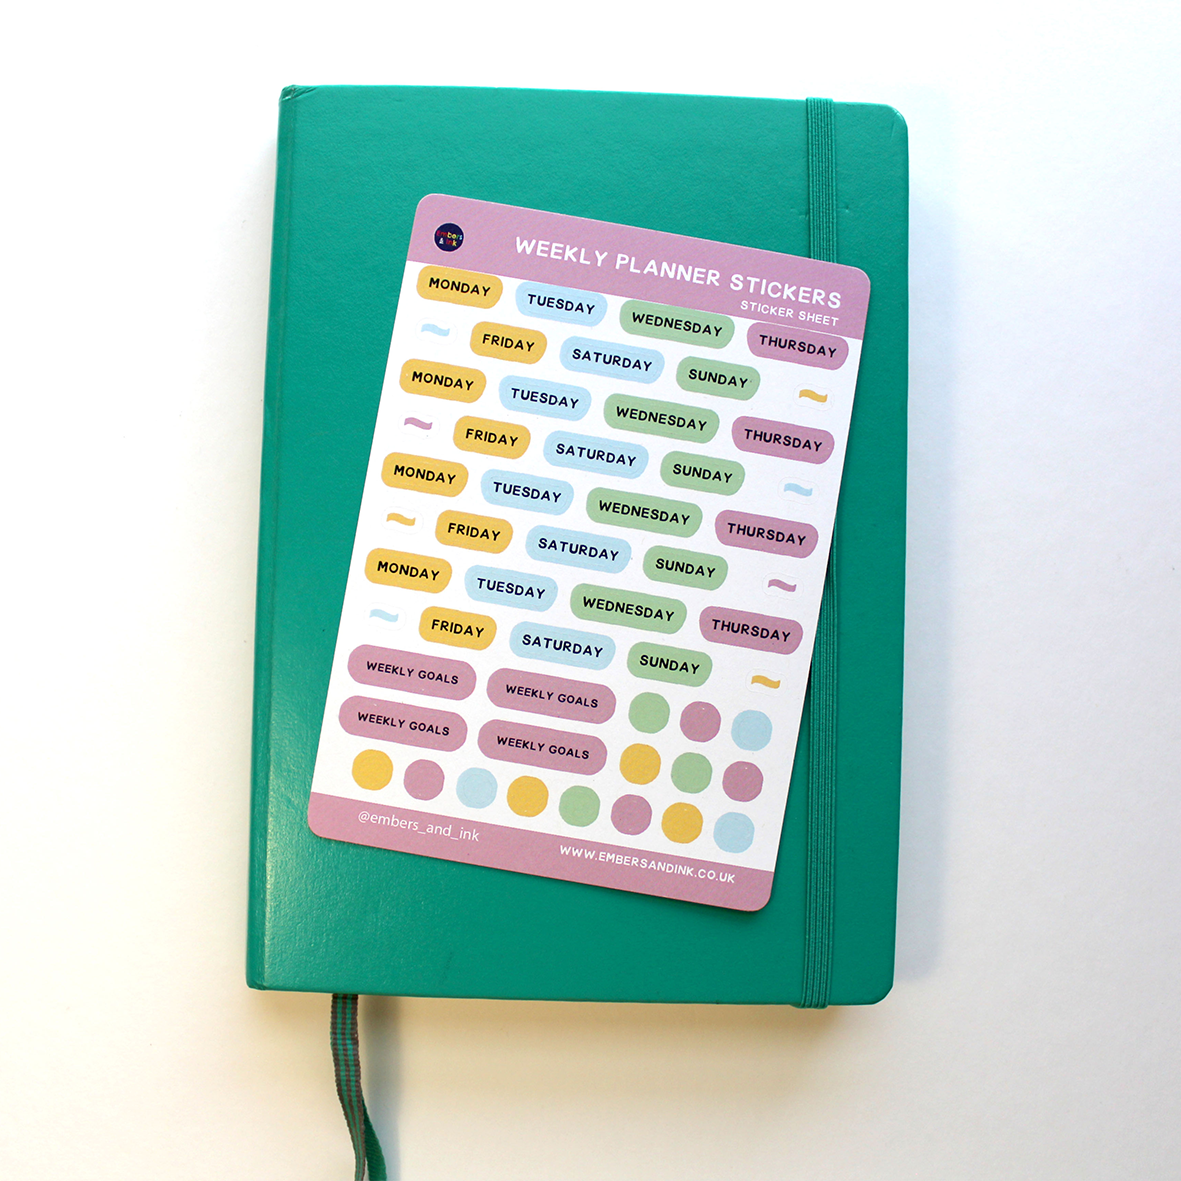 the weekly planner sticker sheet is shown resting on a closed journal.